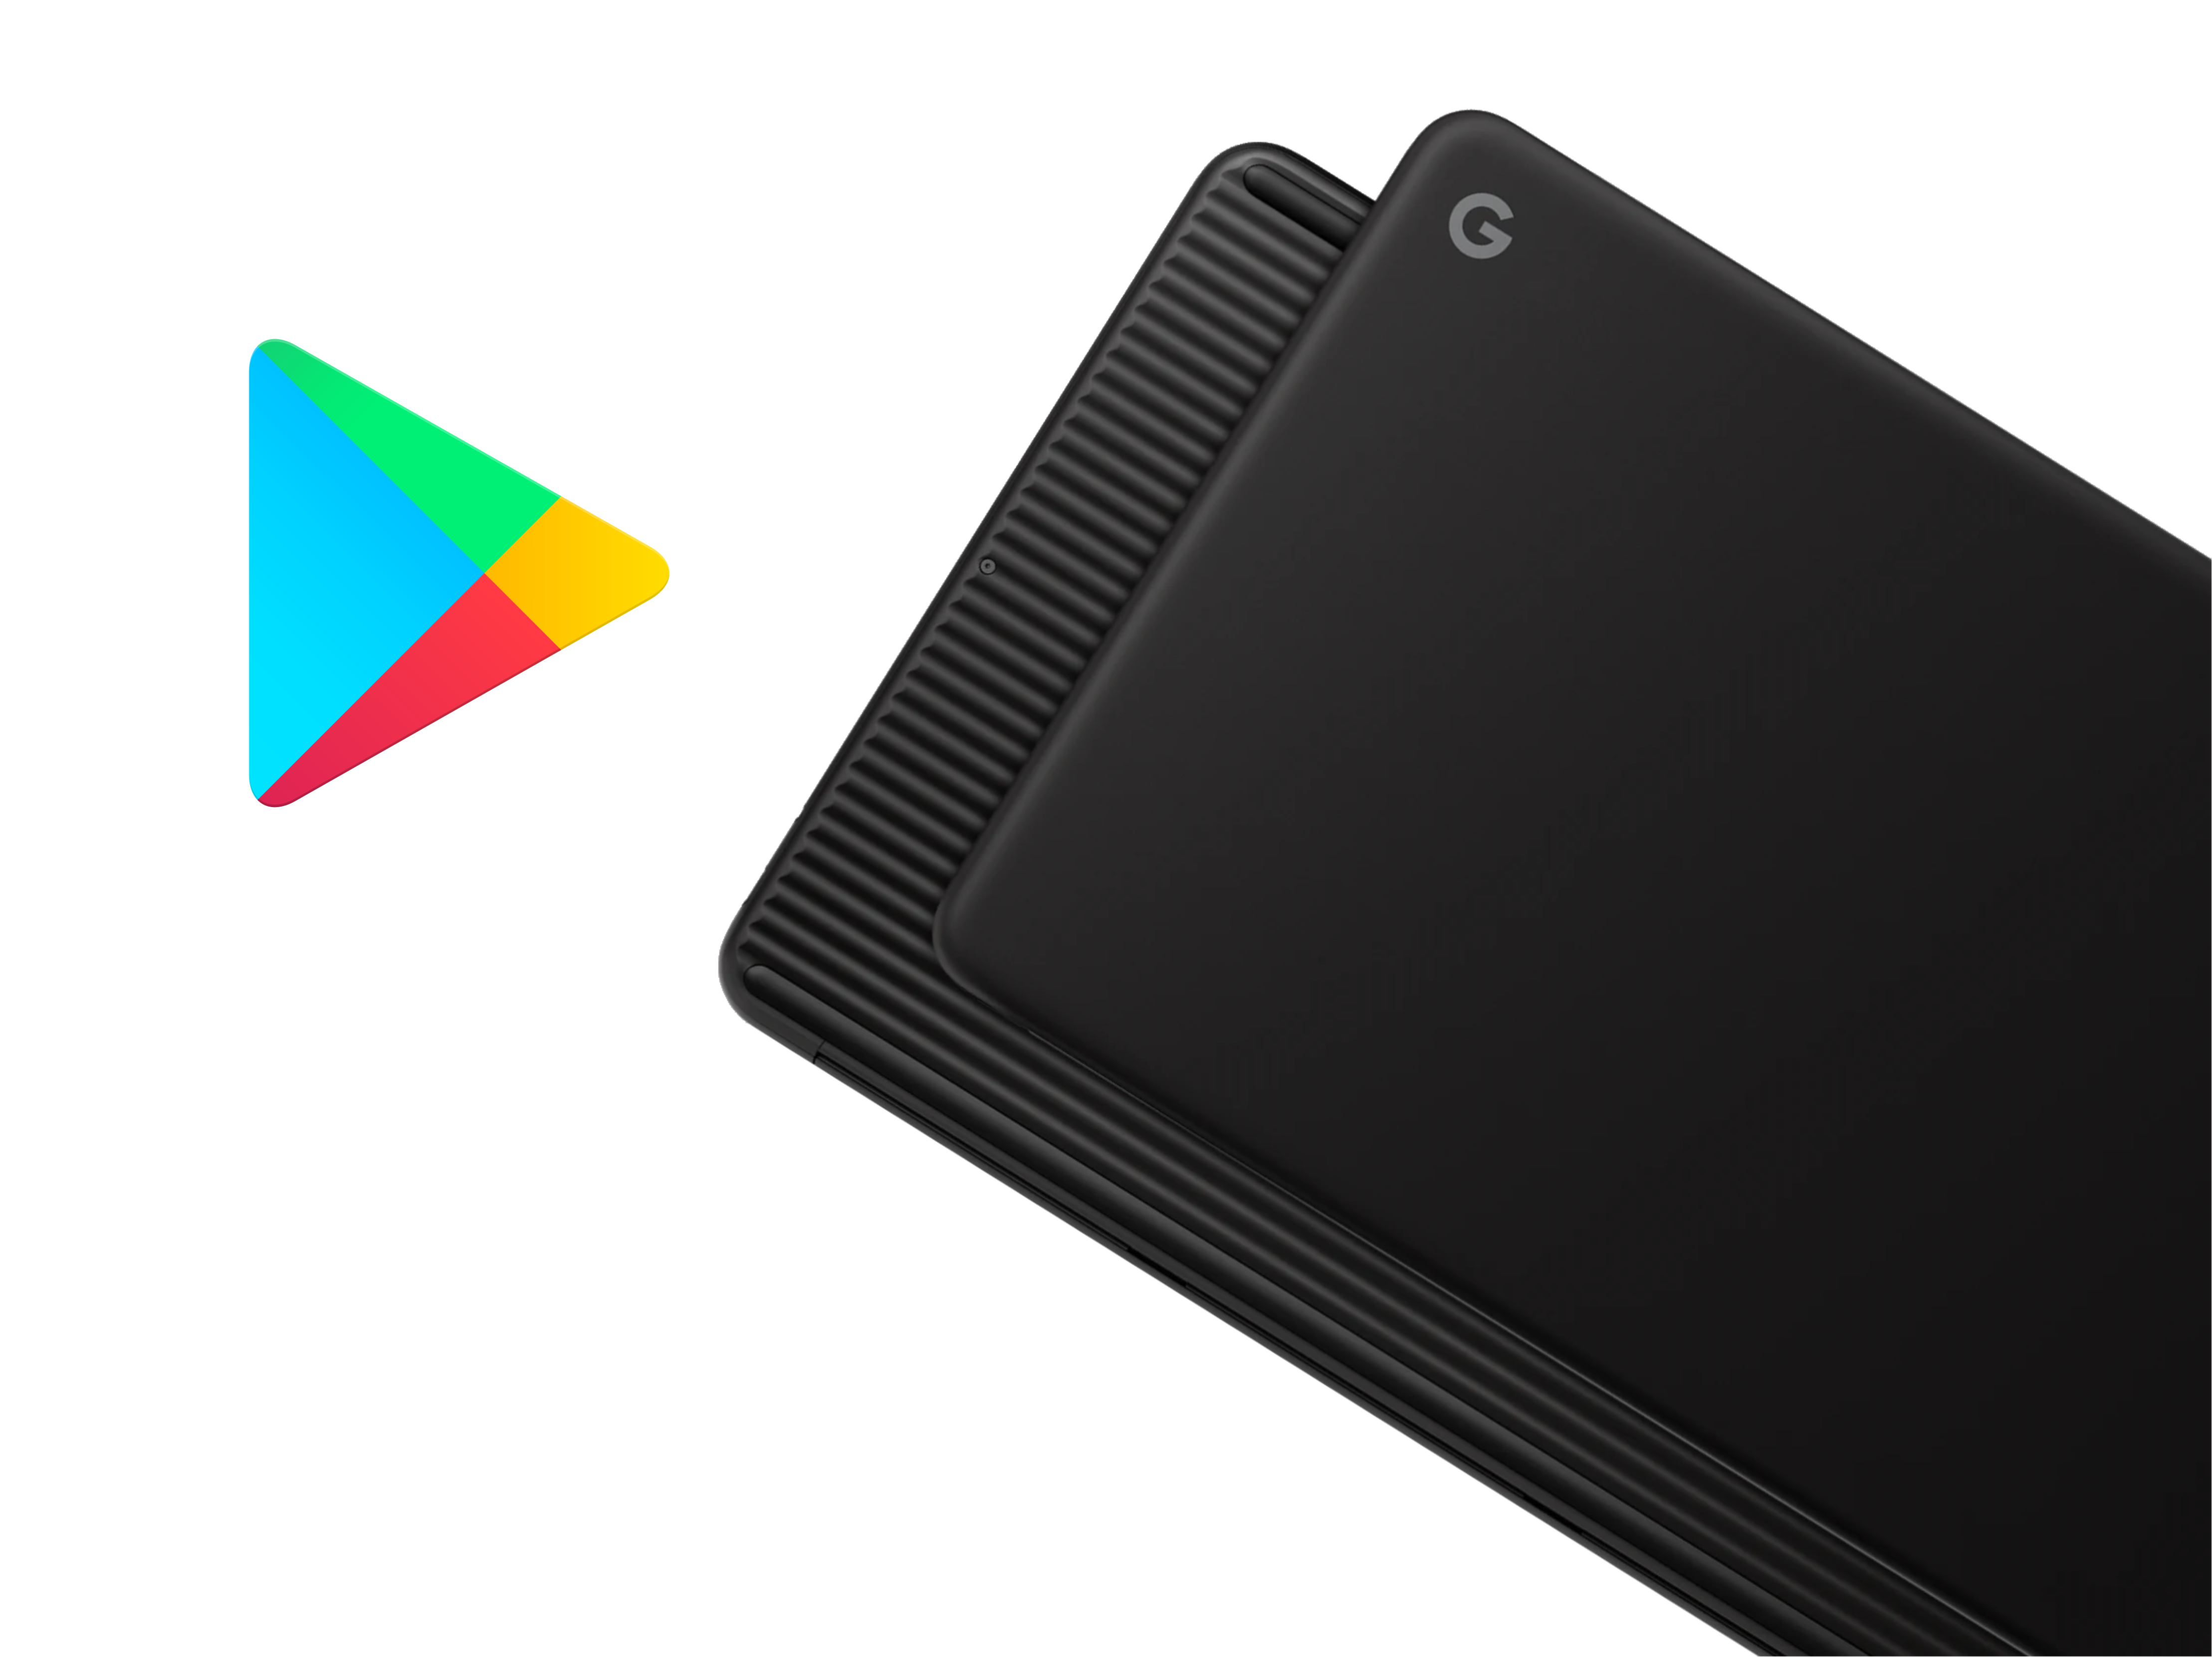 The Play Store to promote apps and games optimized for Chromebook